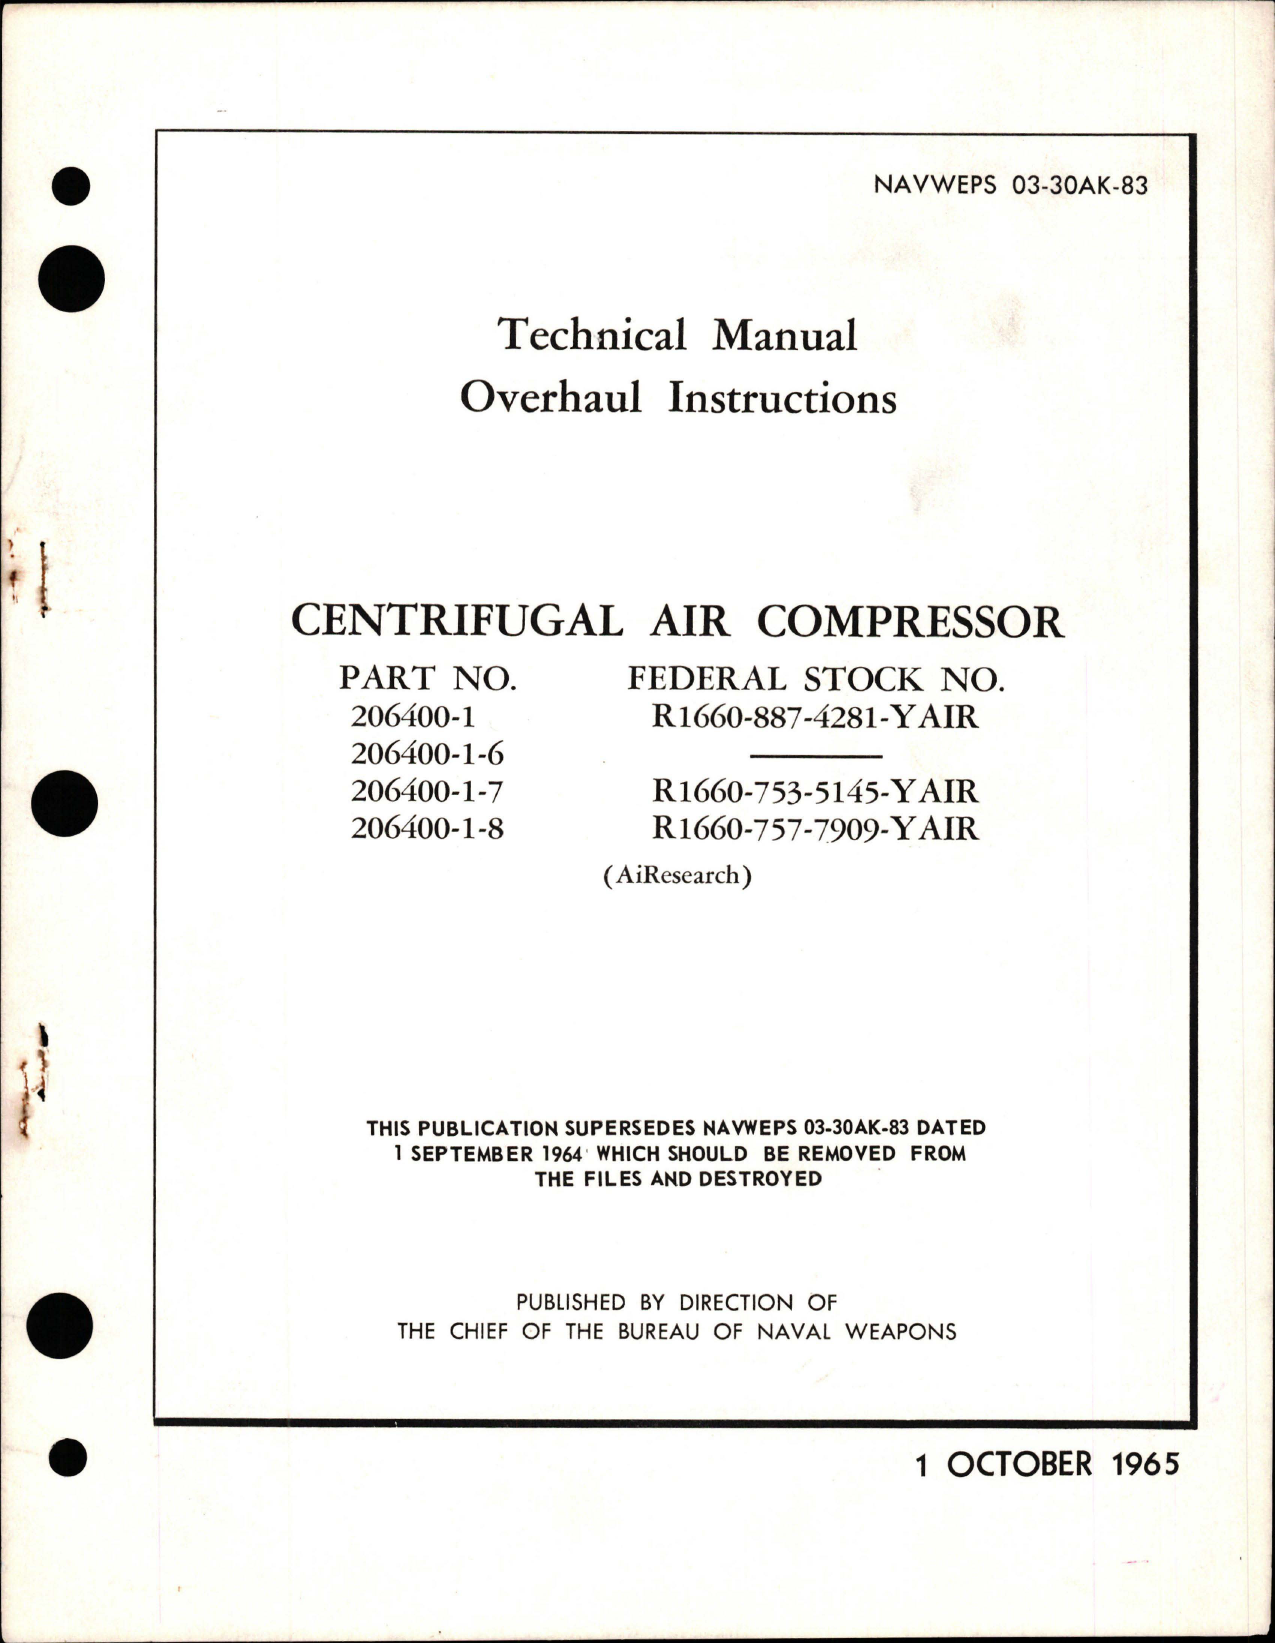 Sample page 1 from AirCorps Library document: Overhaul Instructions for Centrifugal Air Compressor - Parts 206400-1, 206400-1-6, 206400-1-7, and 206400-1-8